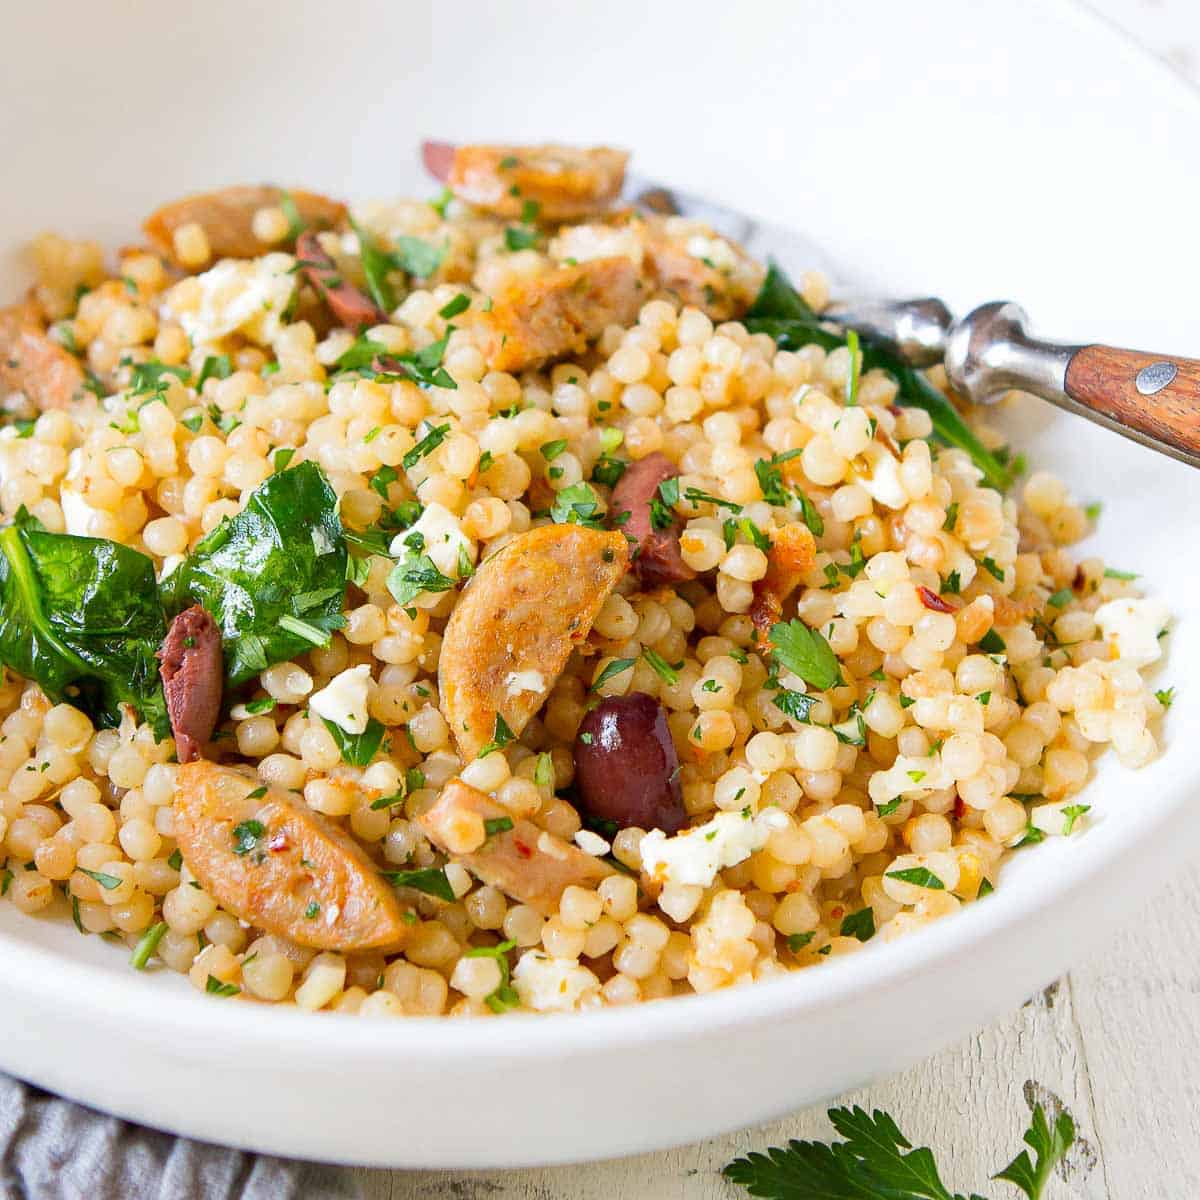 Israeli couscous, cooked sausage, spinach, olives and feta in a white bowl.